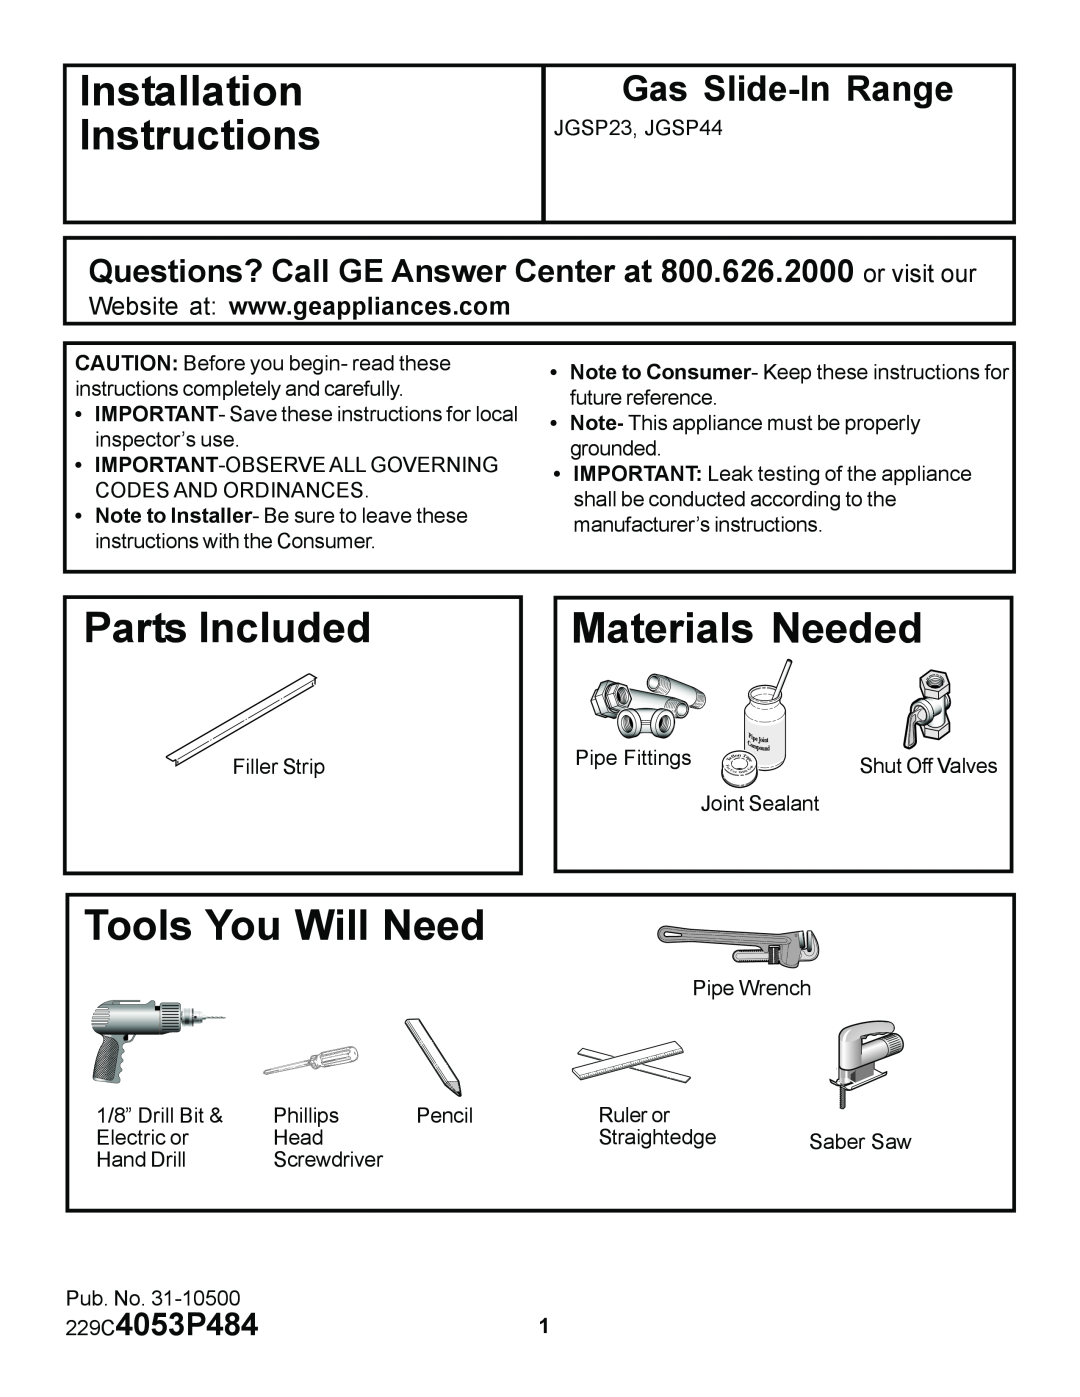 GE JGSP23 manual Installation, Instructions, Parts Included, Materials Needed, Tools You Will Need, Gas Slide-In Range 